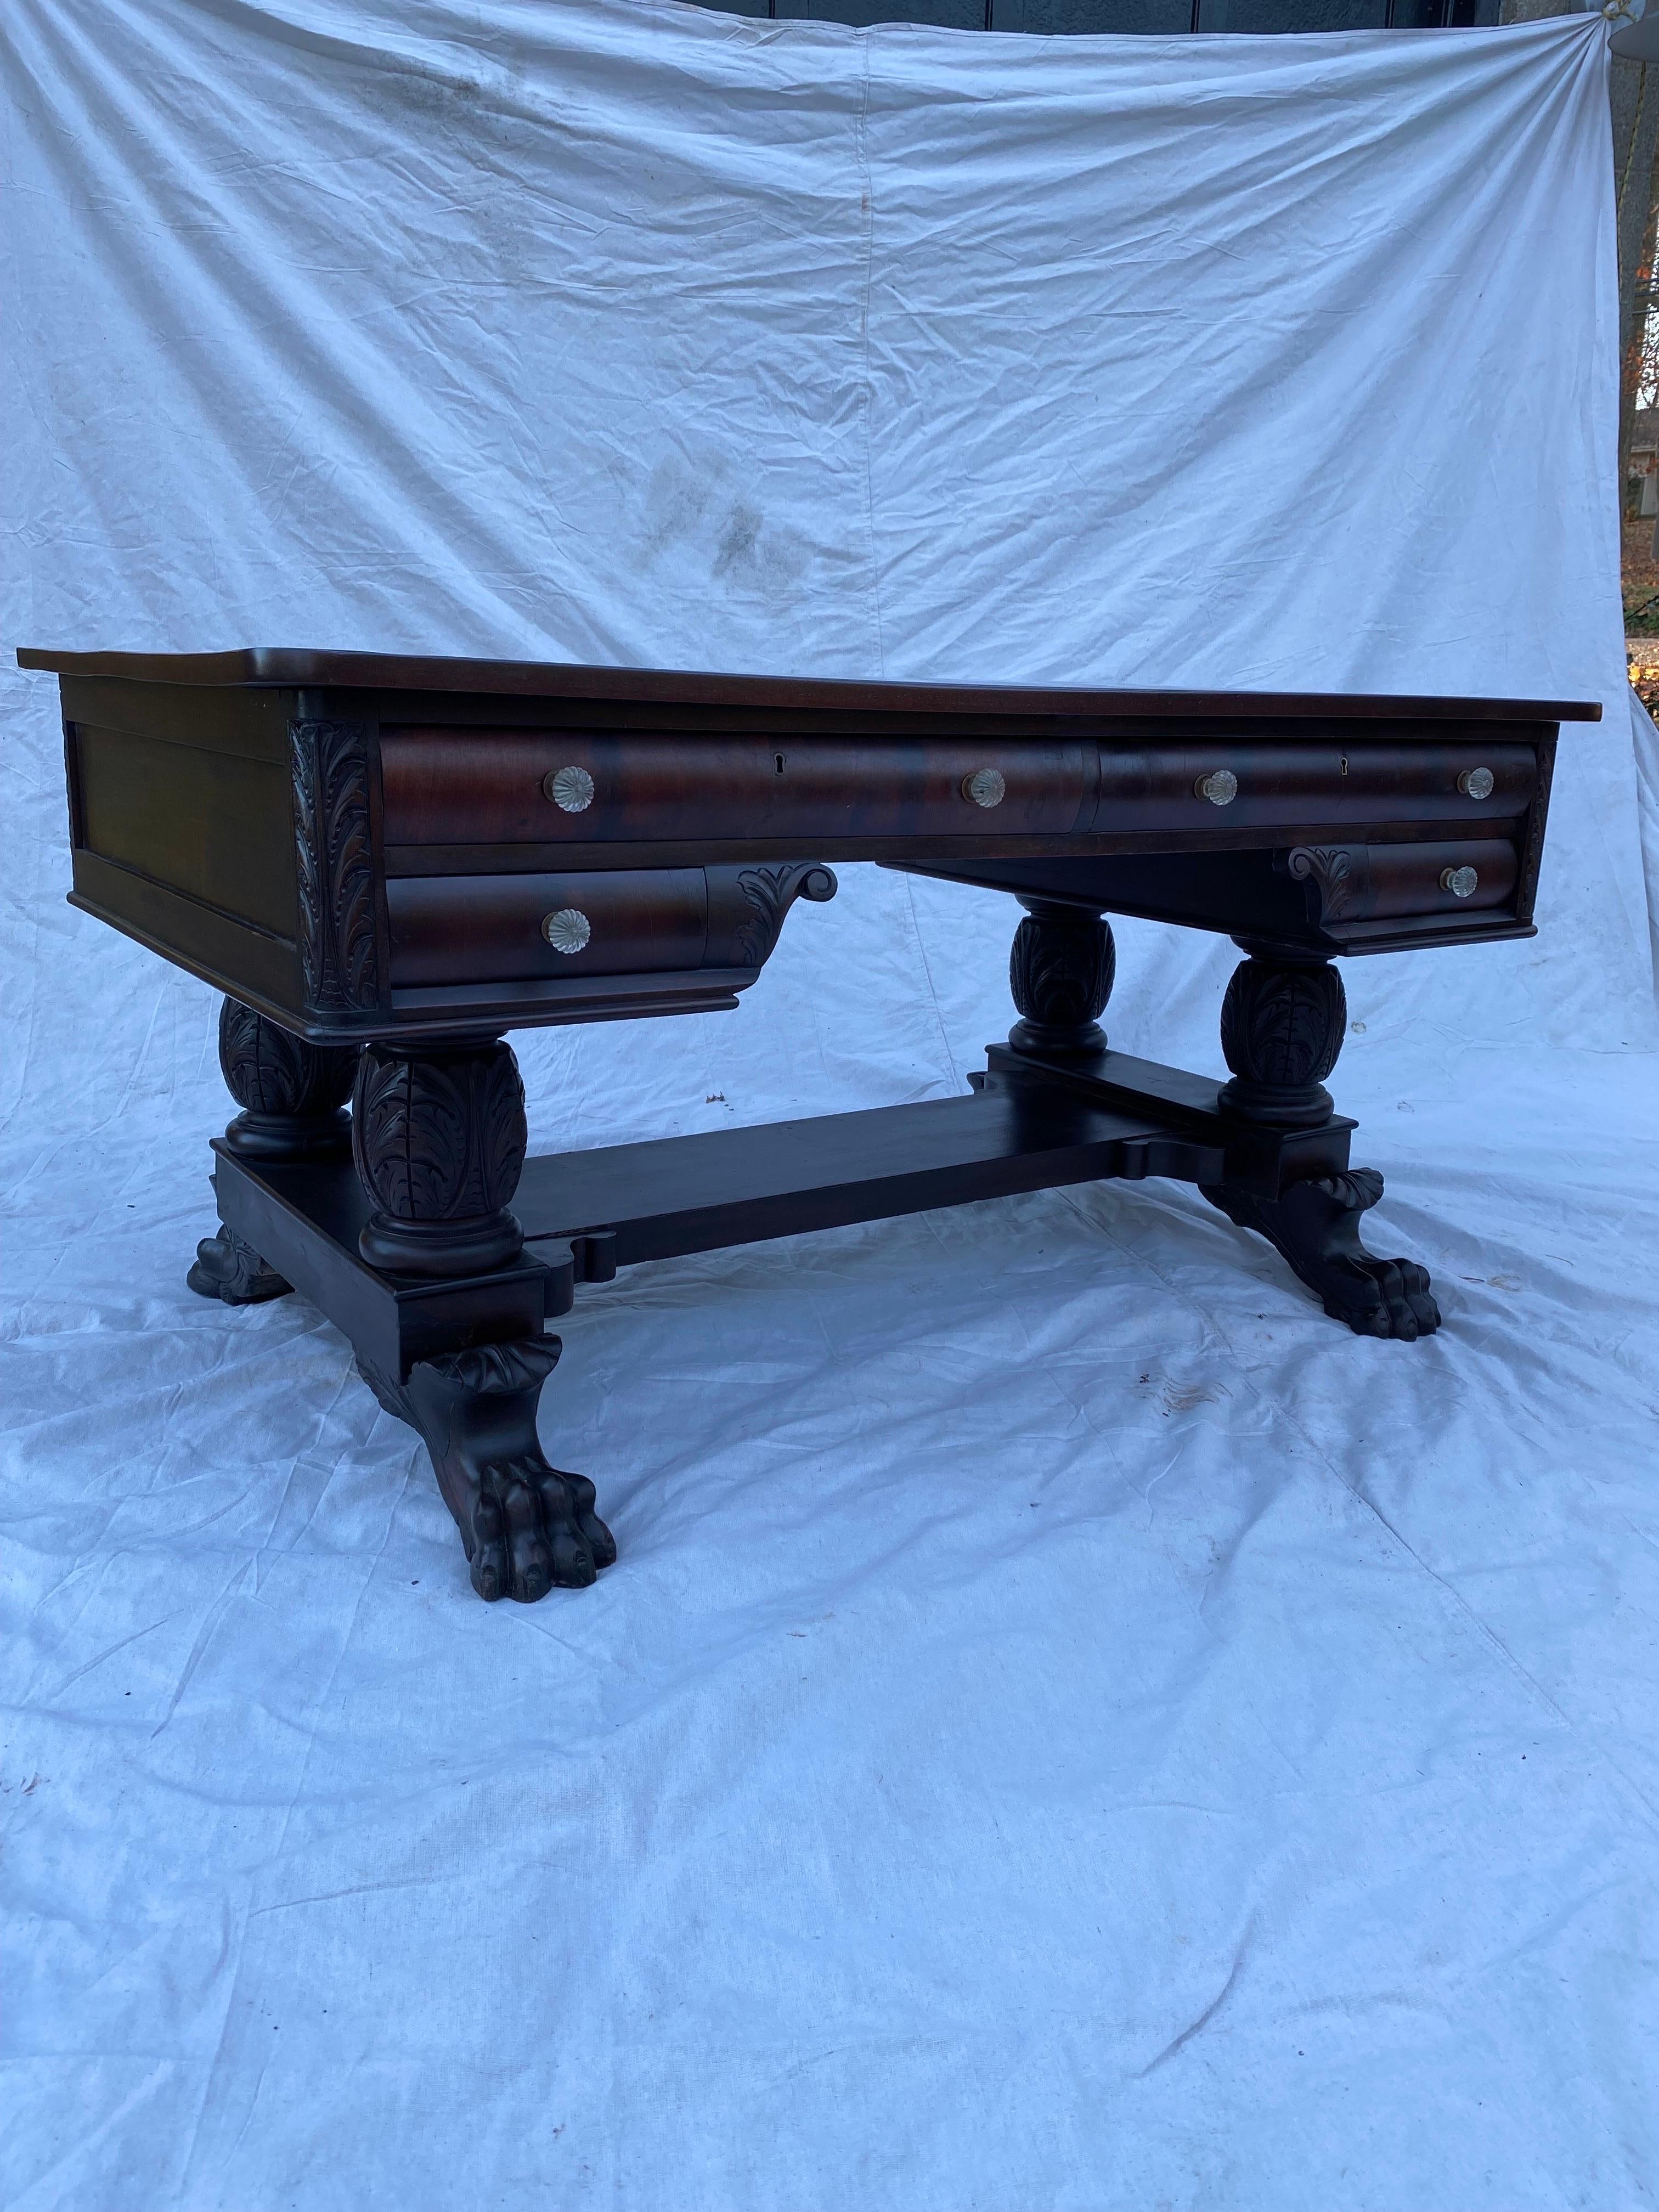 Beautiful Mahogany Partner's Desk with glass knobs. Top refinished and everything else cleaned and ready to go! Two wide drawers per each side with smaller drawers below. Beautiful carved Lion's Paw feet. Ball glides make it easy to move desk when